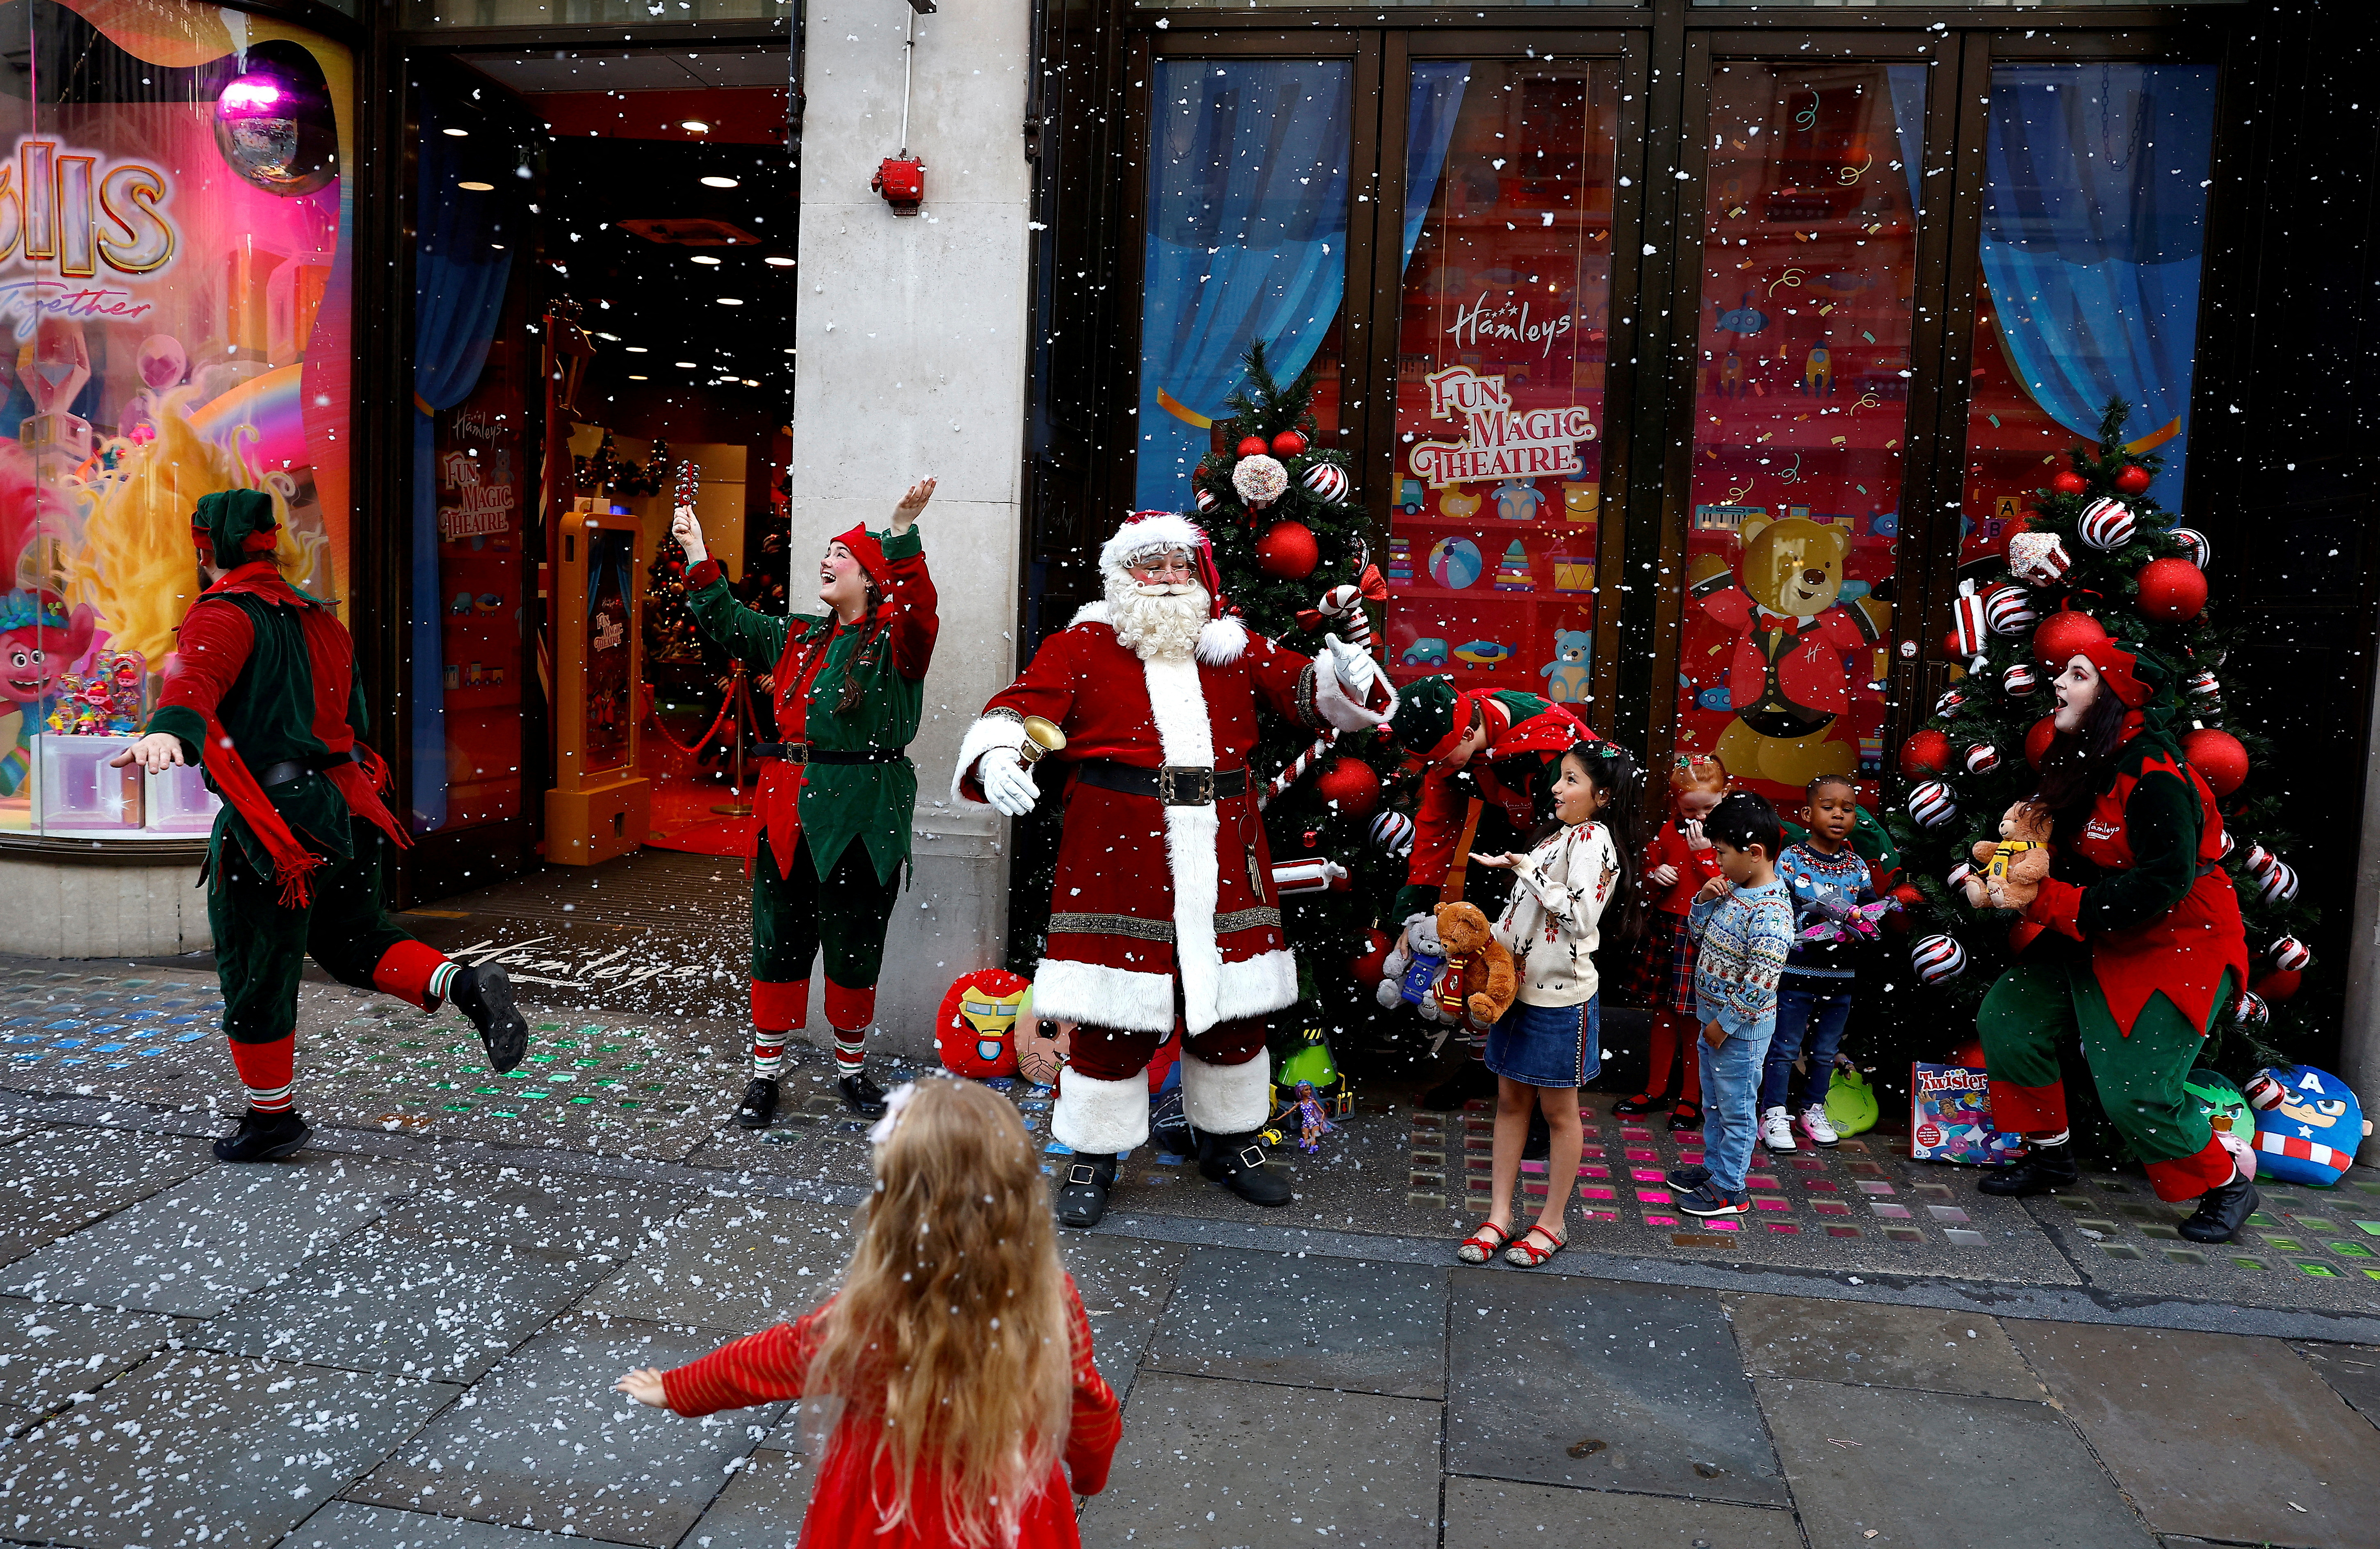 Holiday toy sales expected to slow amid economic struggles